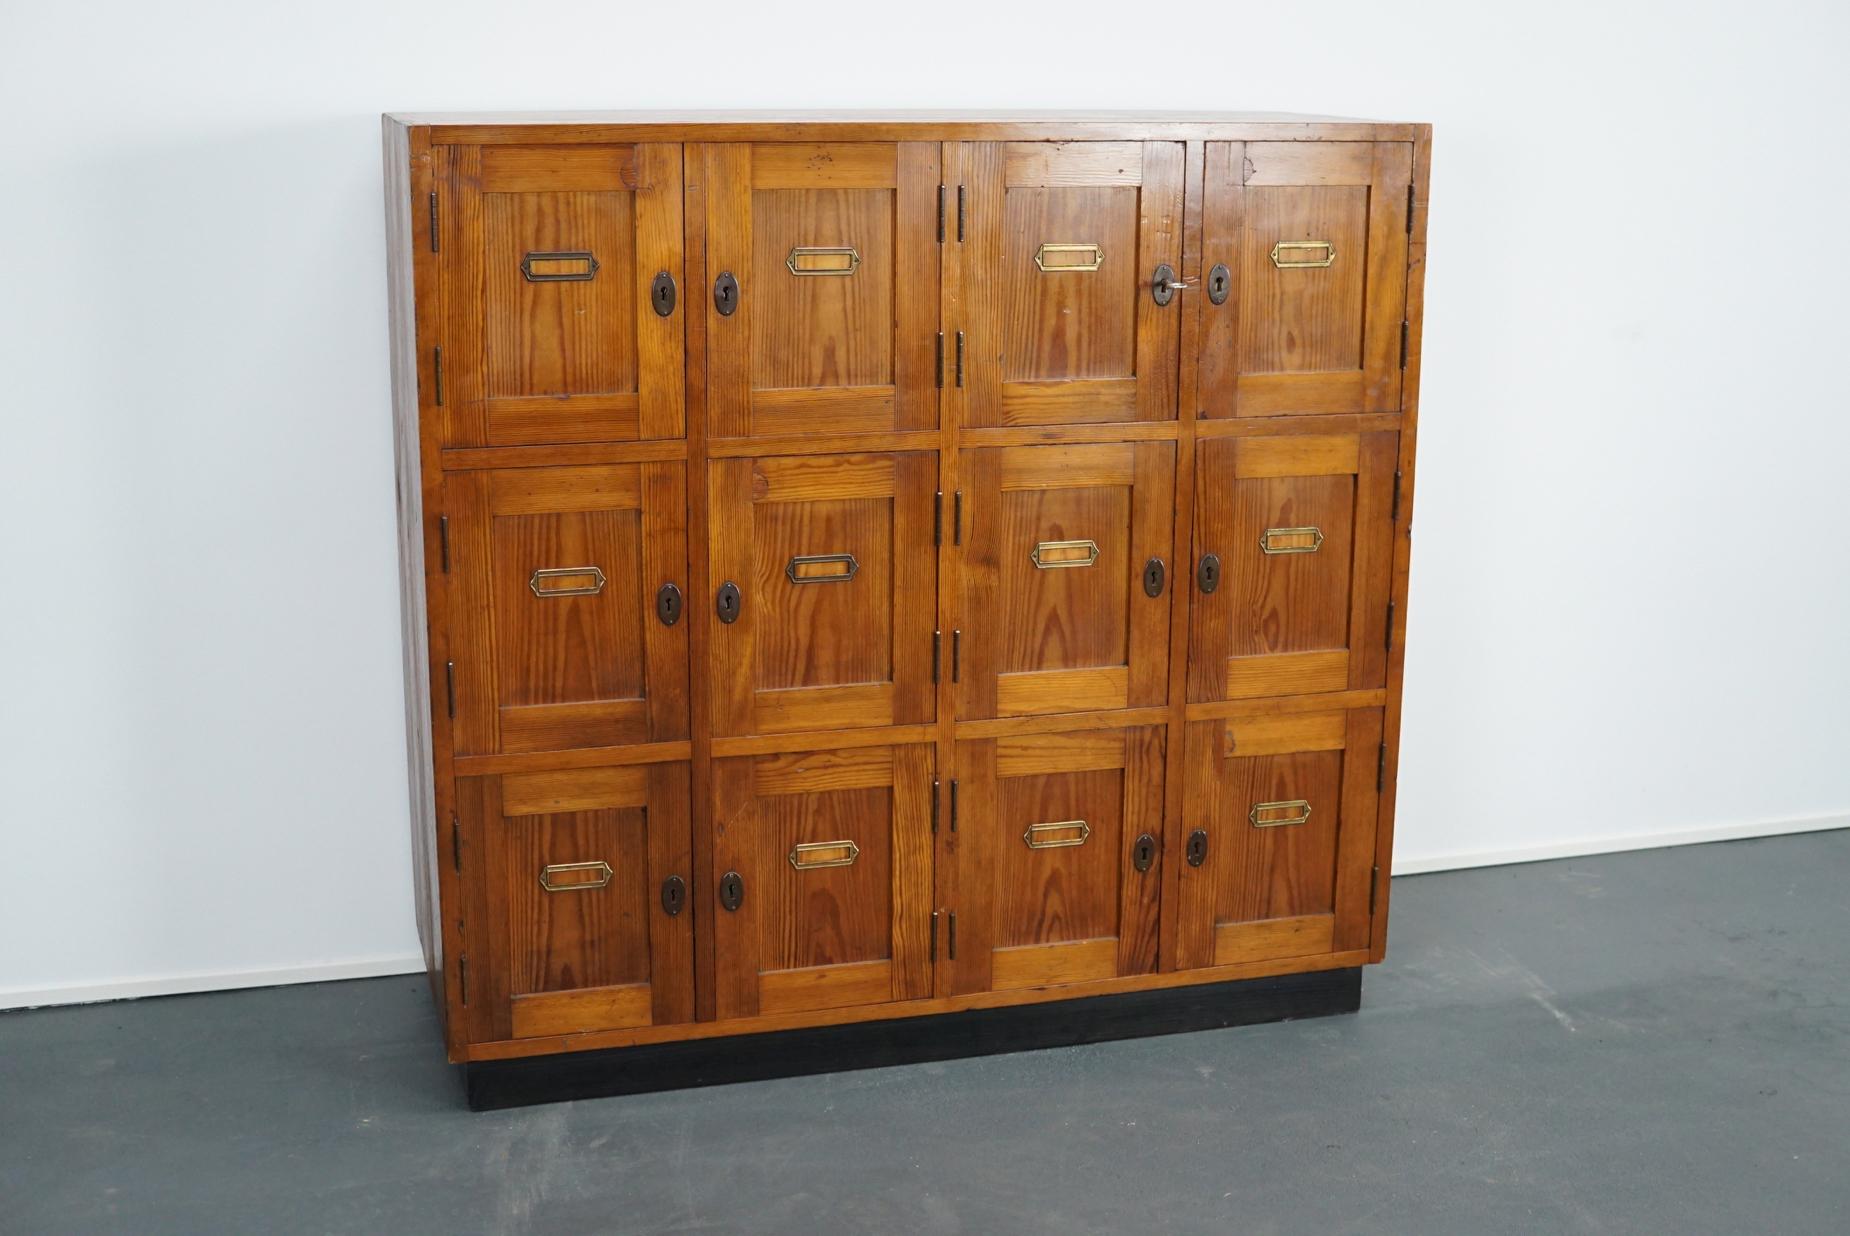 This Dutch pine school locker cabinet was made circa 1930s in the Netherlands.
It features 12-doors/compartments which can be locked separately. 
The interior dimensions of the compartments are: 37 x 25 x 30 cm.